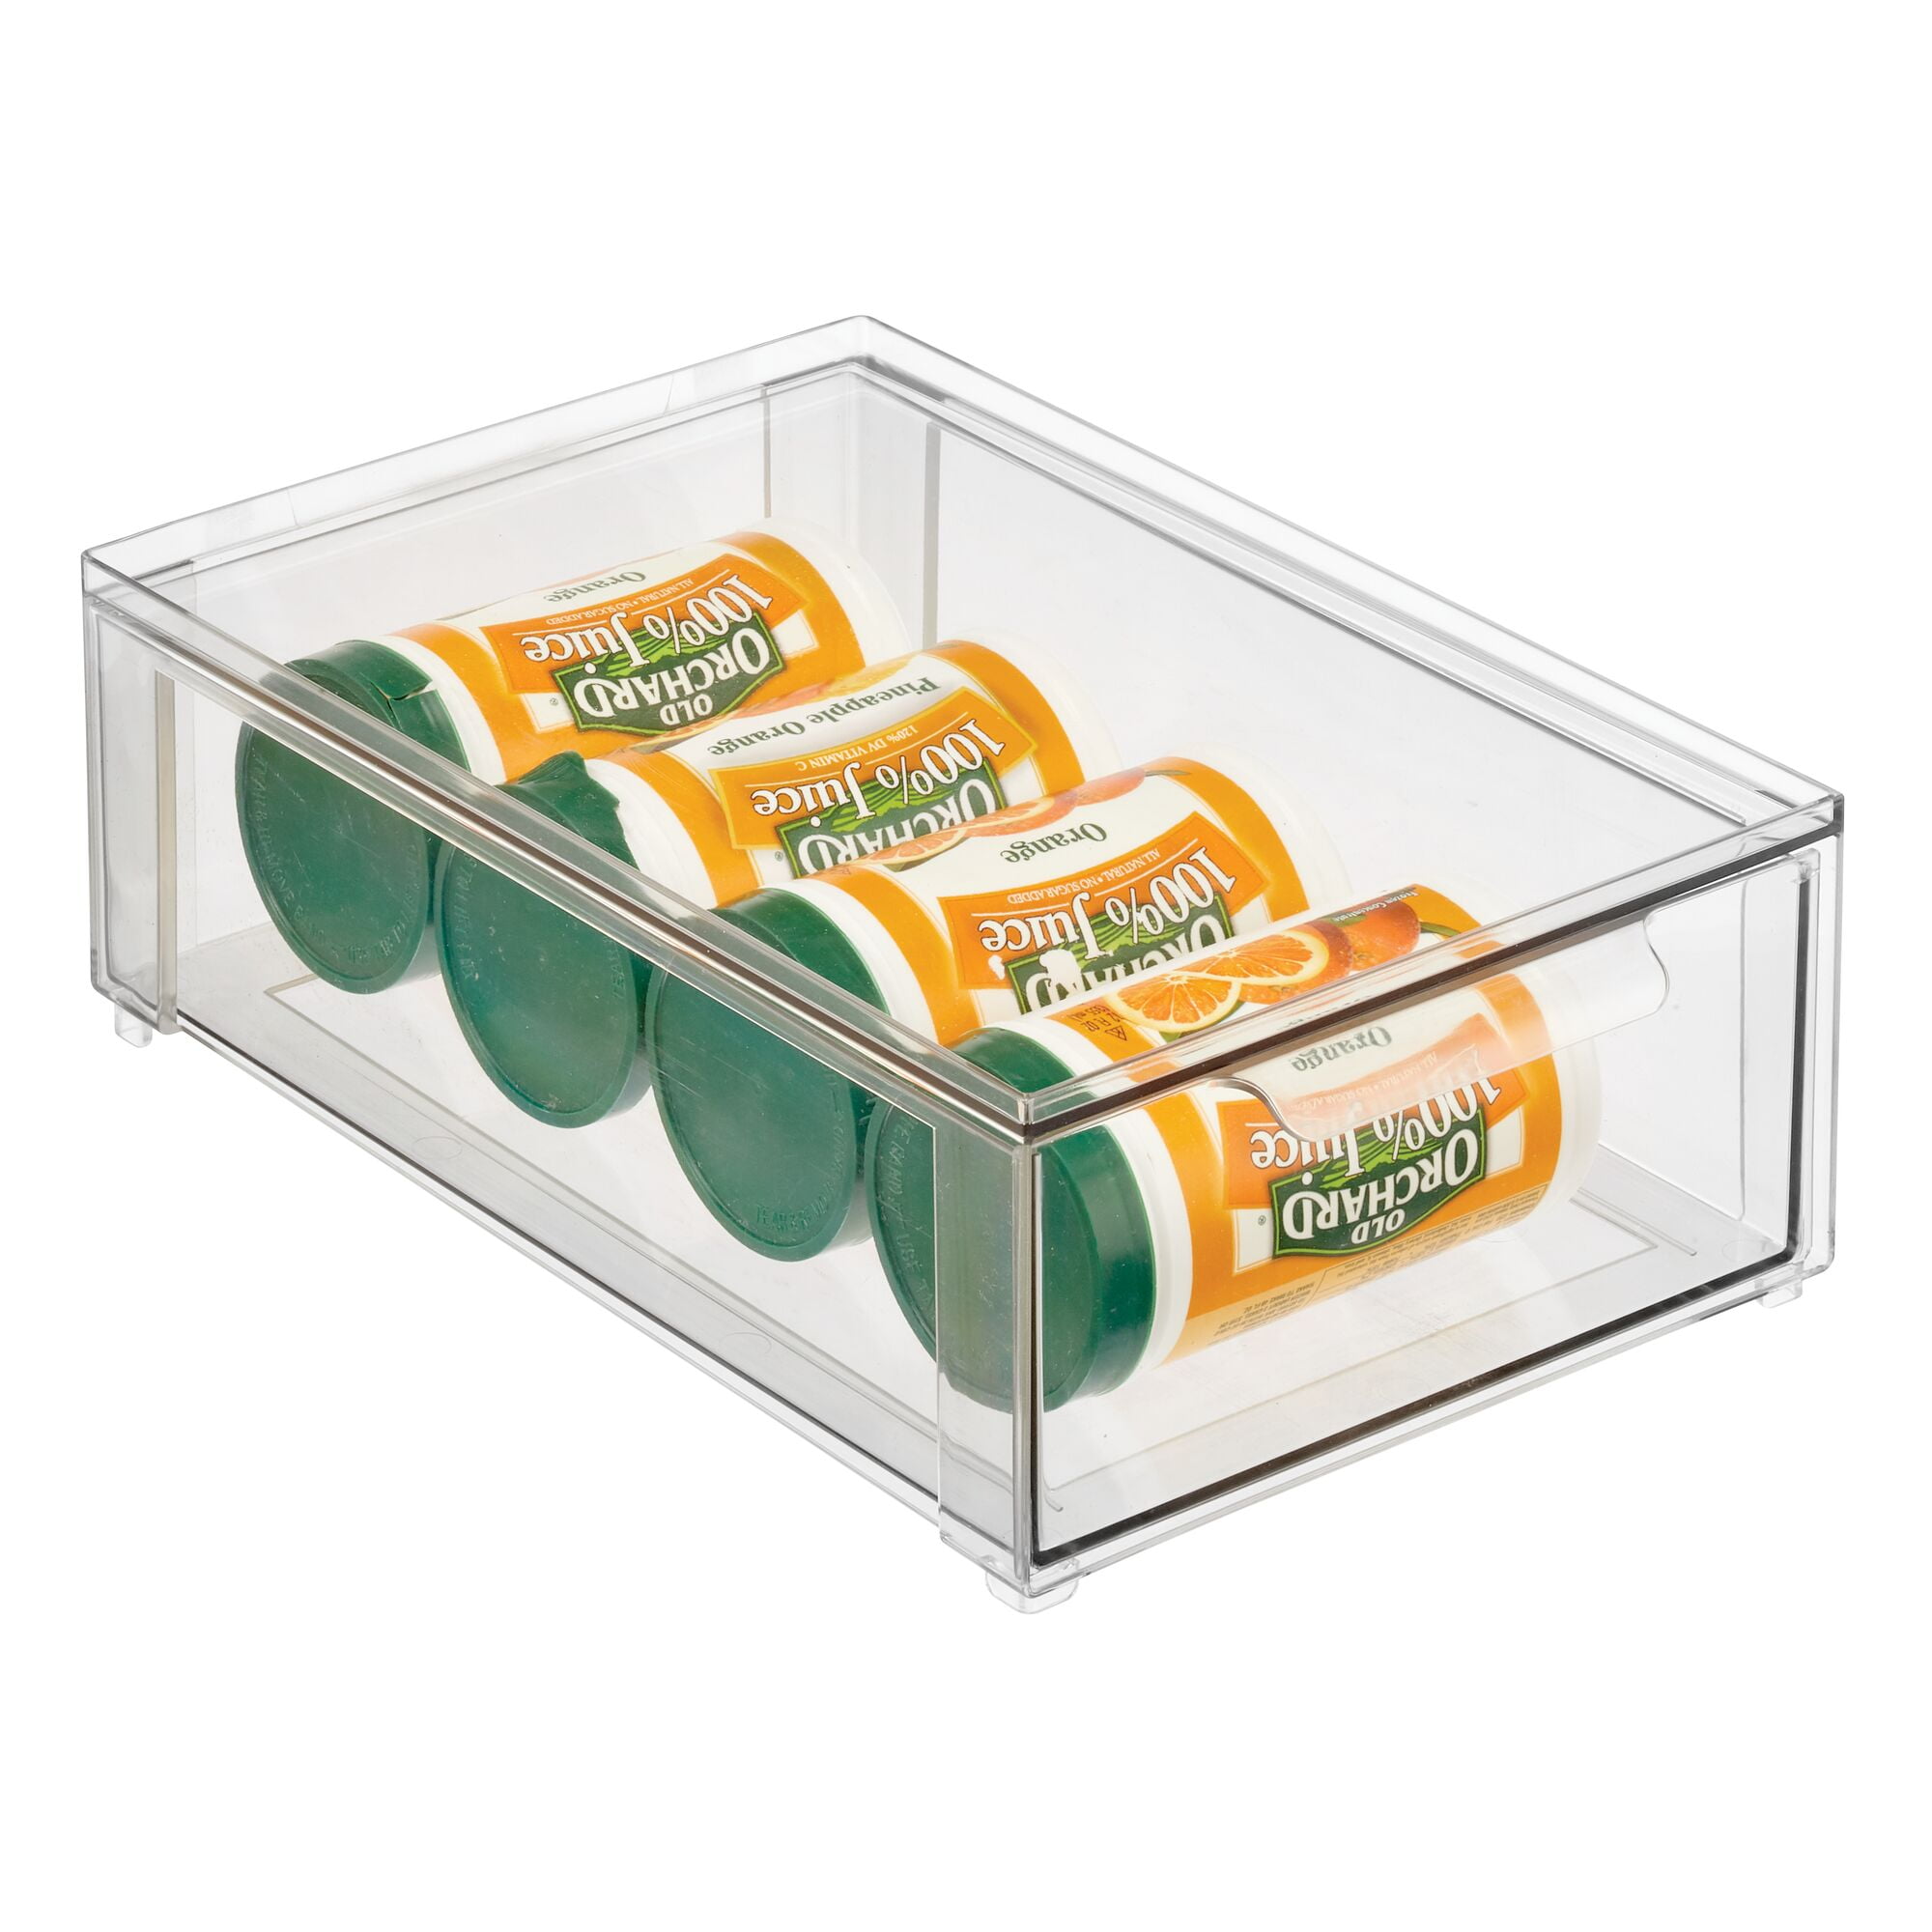  mDesign Plastic Adhesive Mount Storage Organizer Container for  Kitchen or Pantry Wall Organization - Space Saving Holder for Sandwich  Bags, Foil - 11 Wide - Ligne Collection - 2 Pack - Clear: Home & Kitchen